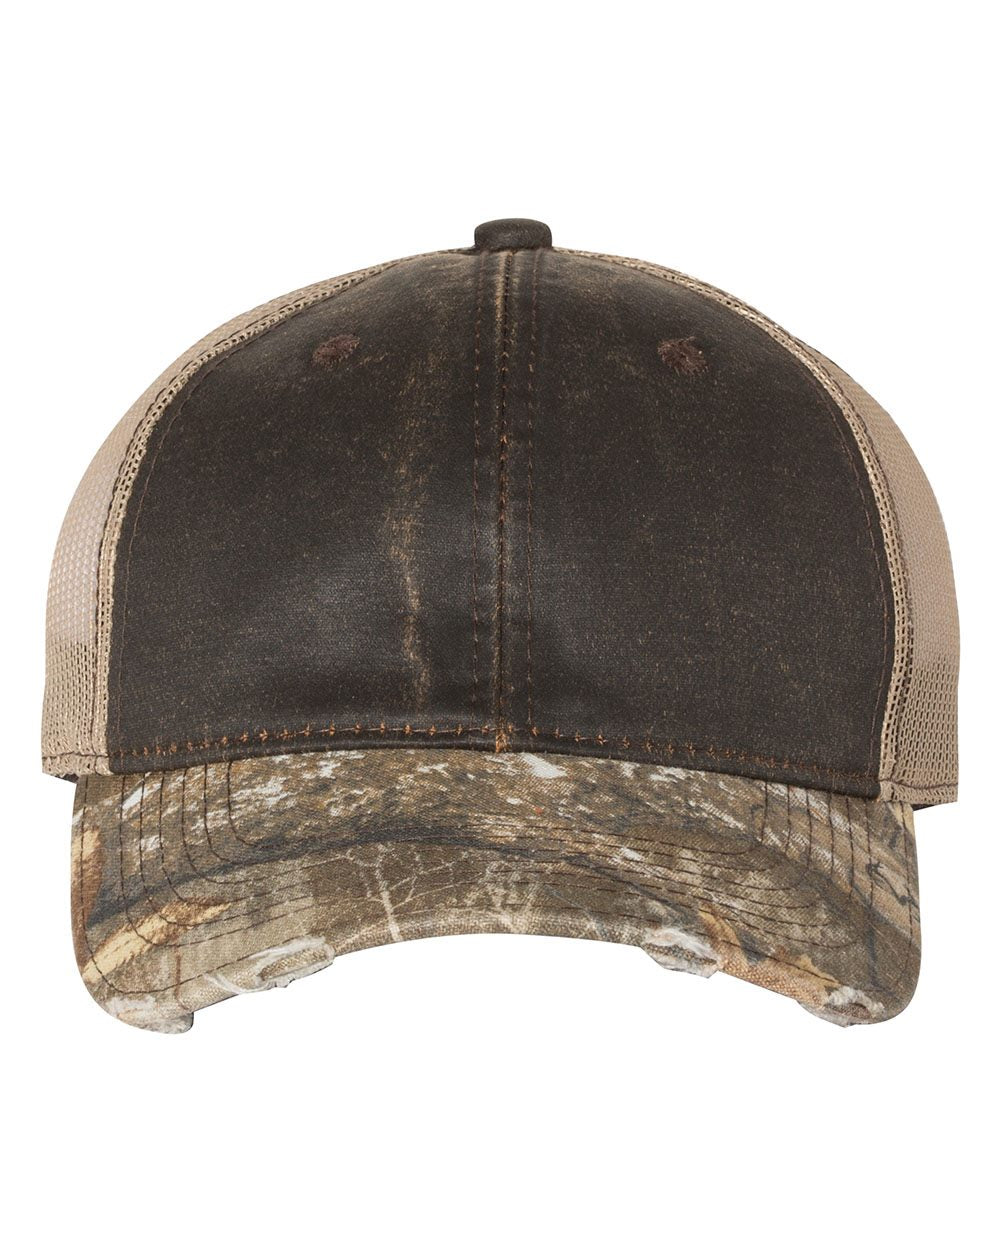  Image of the Distressed Camo Mesh-Back Cap in Tan/Camo/Brown, featuring a classic camo print and mesh back, perfect for adding rugged outdoor style to any ensemble.